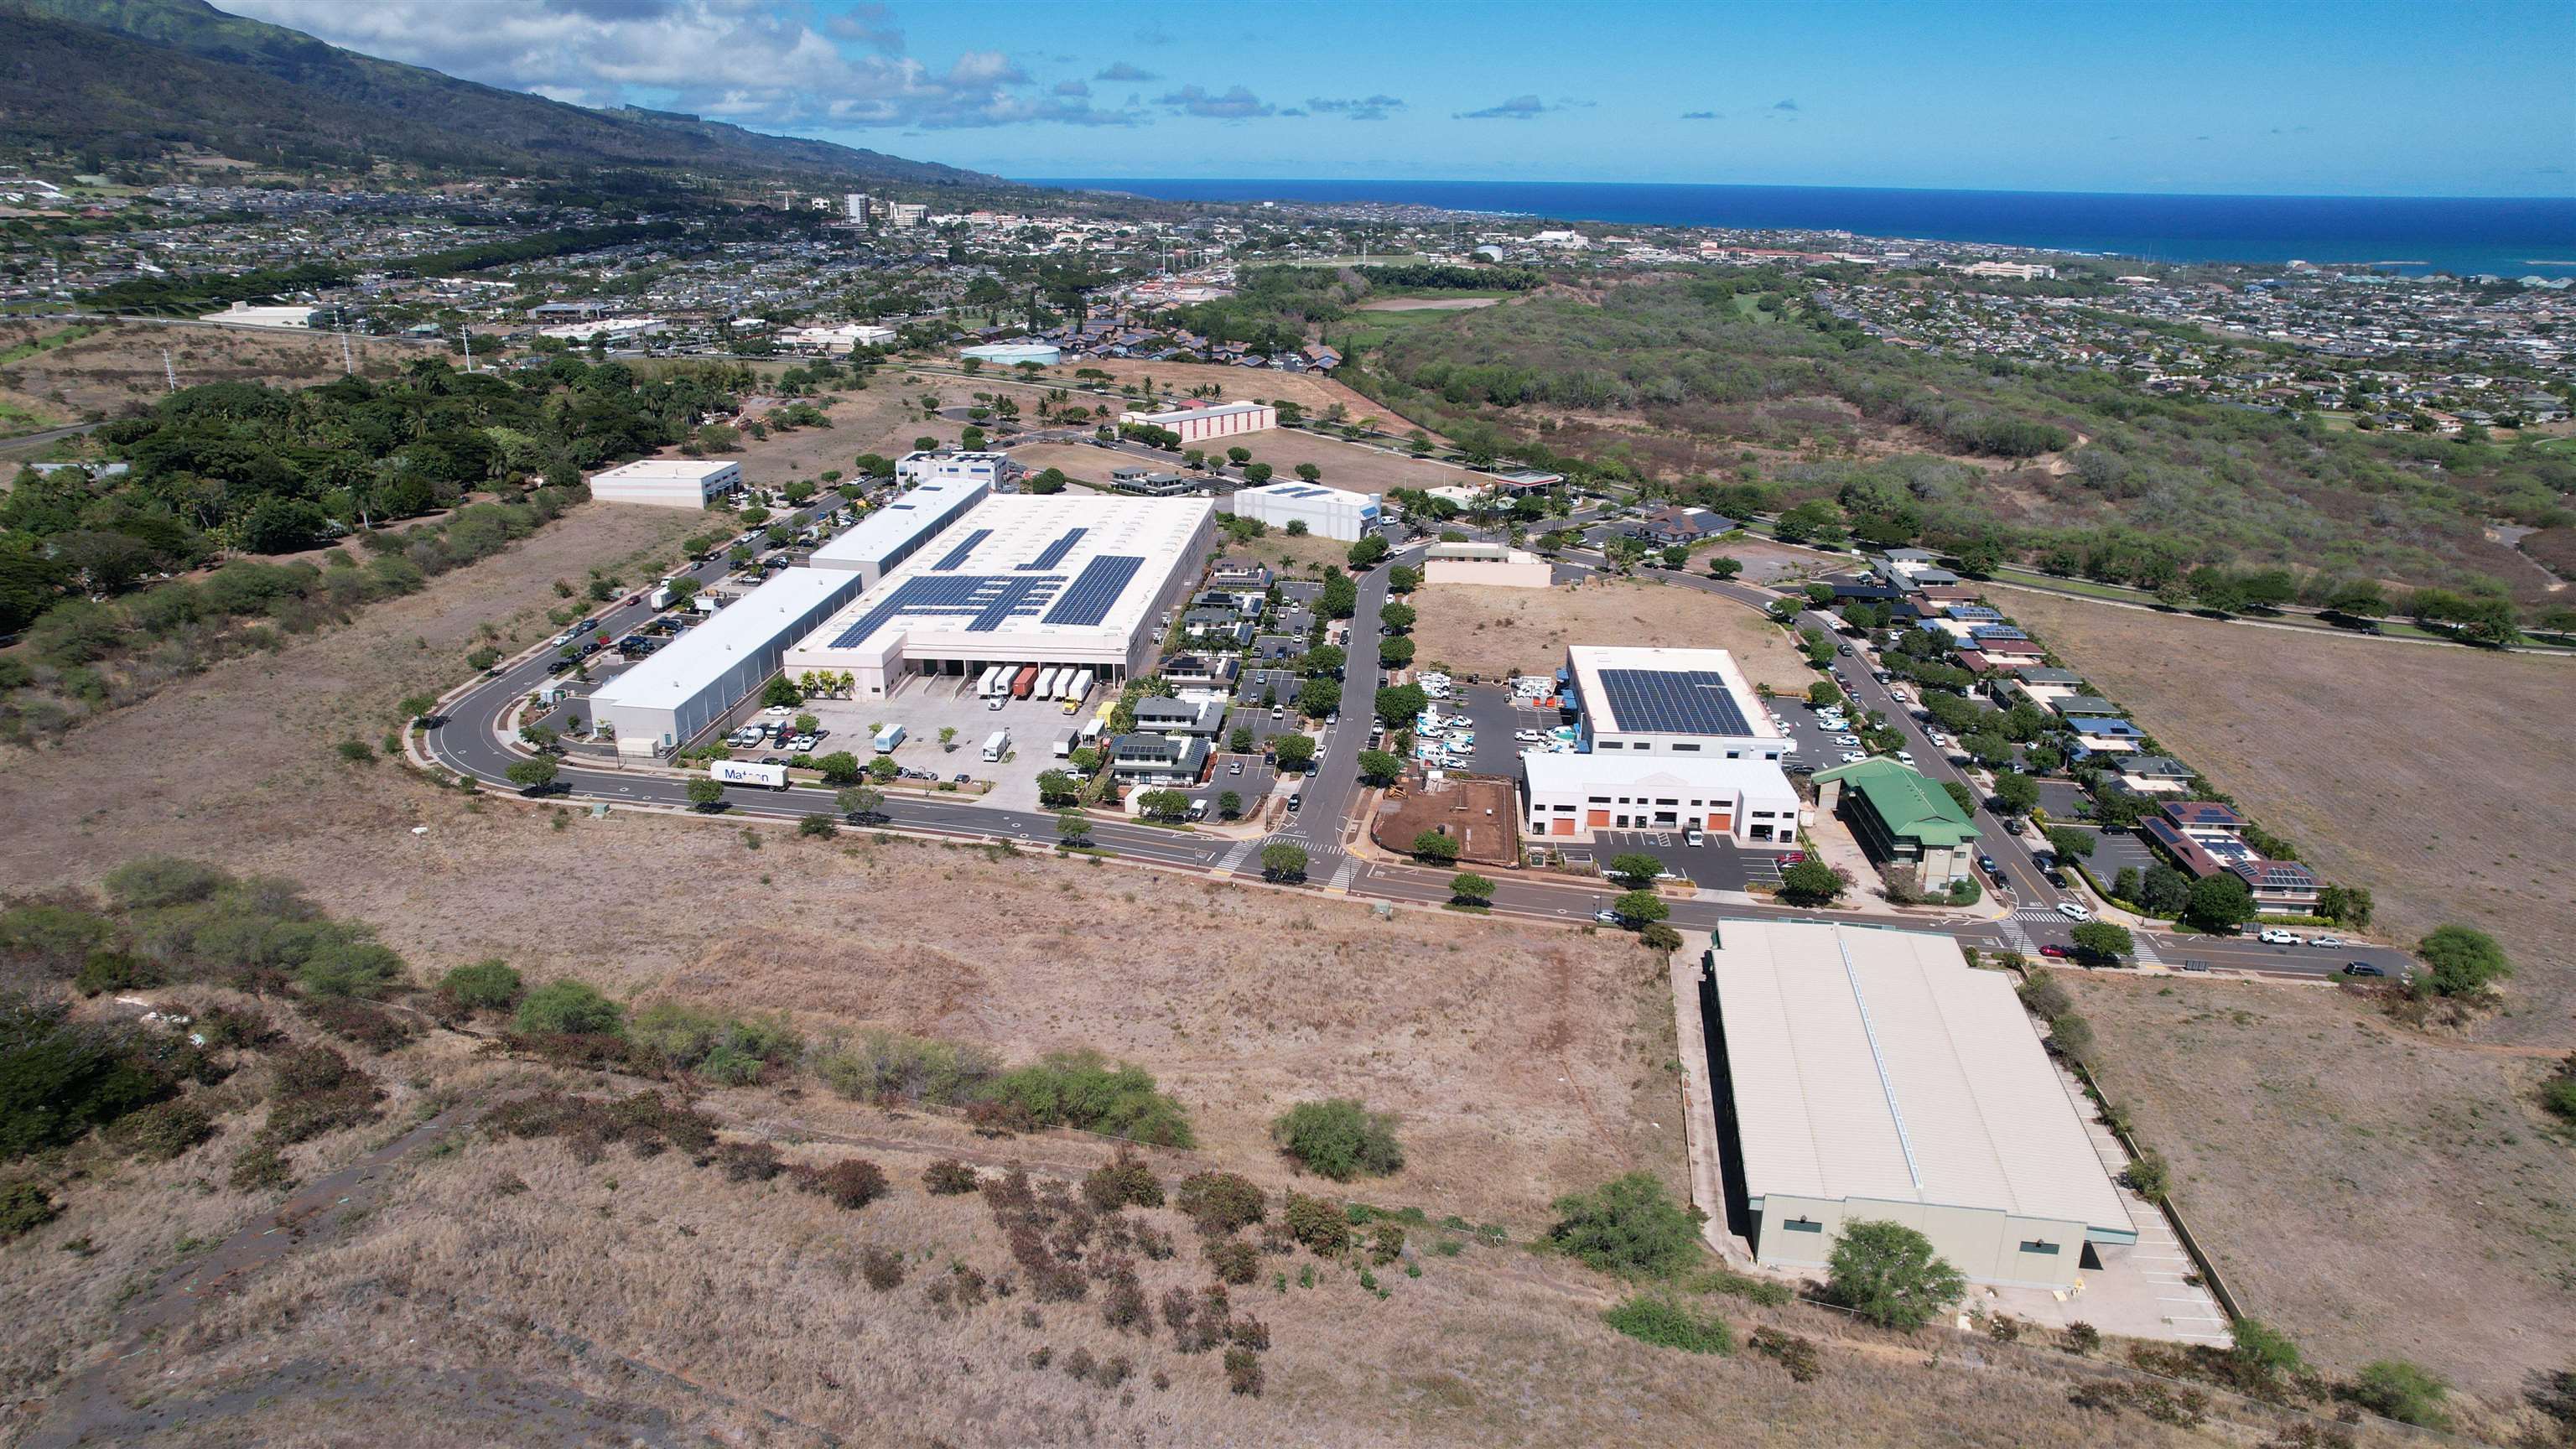 Fee simple vacant land parcel near busy intersection of Kuikahi Drive and Waiale Road.  VMX zoning allows for a wide array of uses.  Ready to build lot with drainage and utilities stubbed to site.